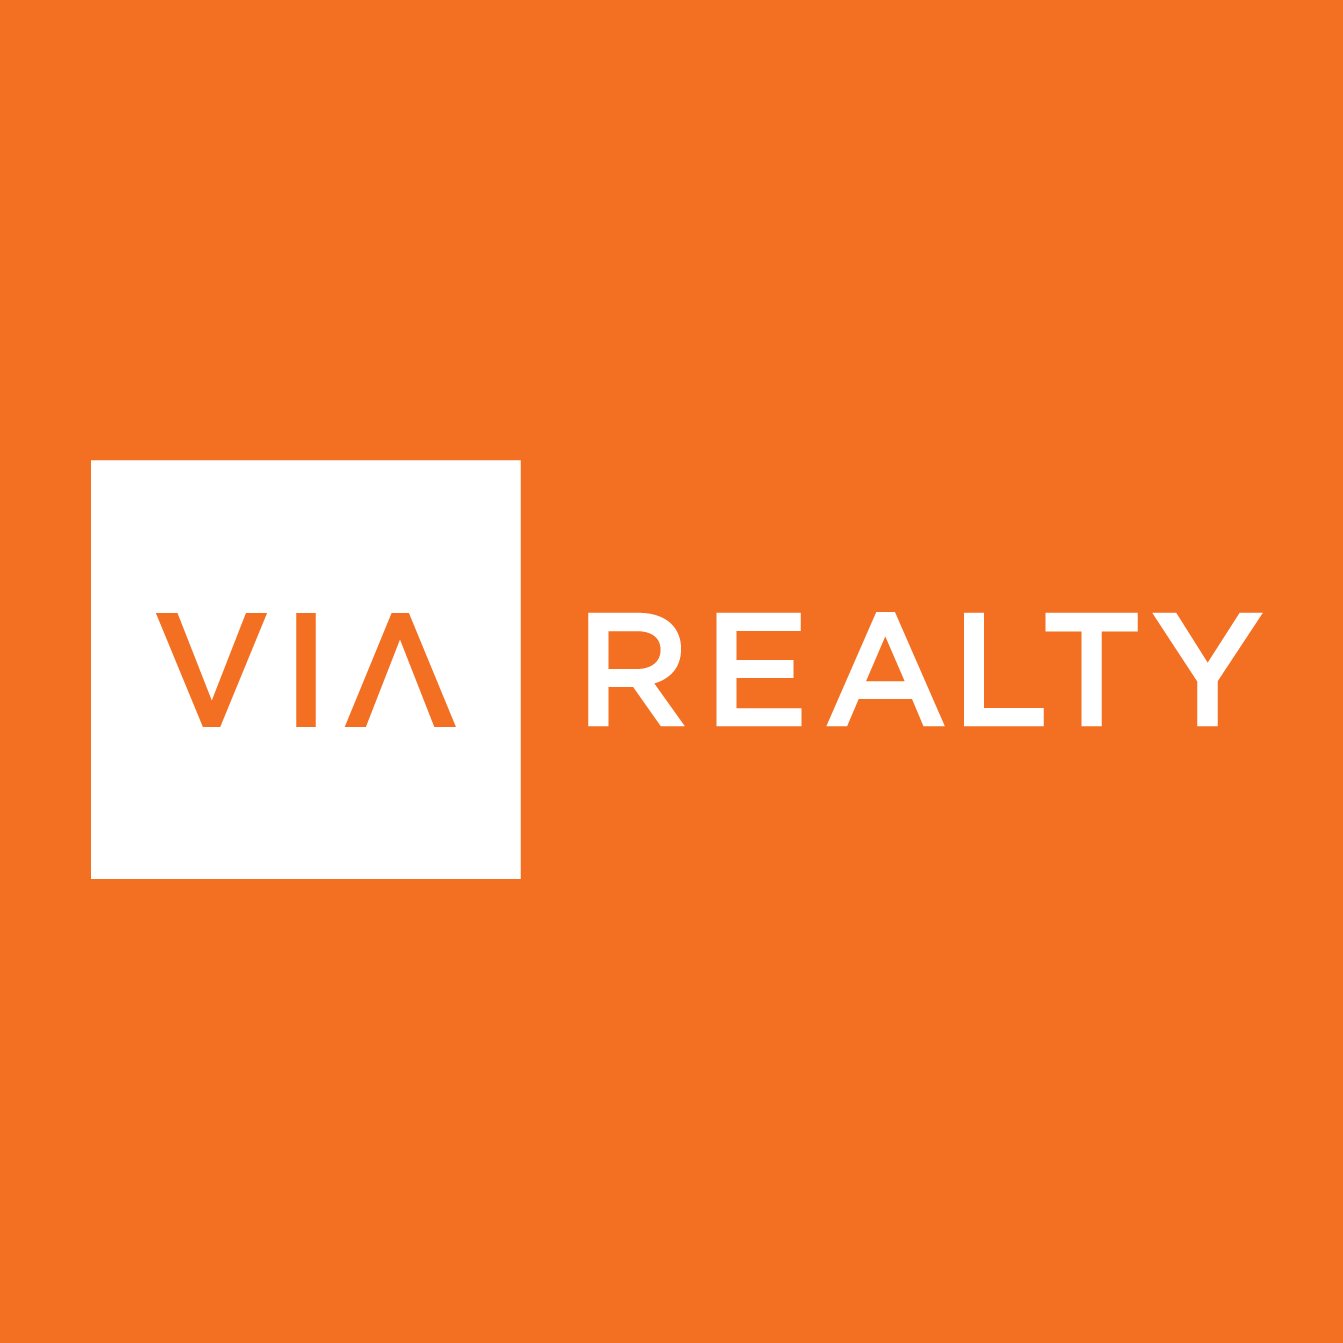 Via Realty has partnered with the most prominent & prestigious builder in the region to offer up exclusive pricing & access to #luxury ownership opportunities.